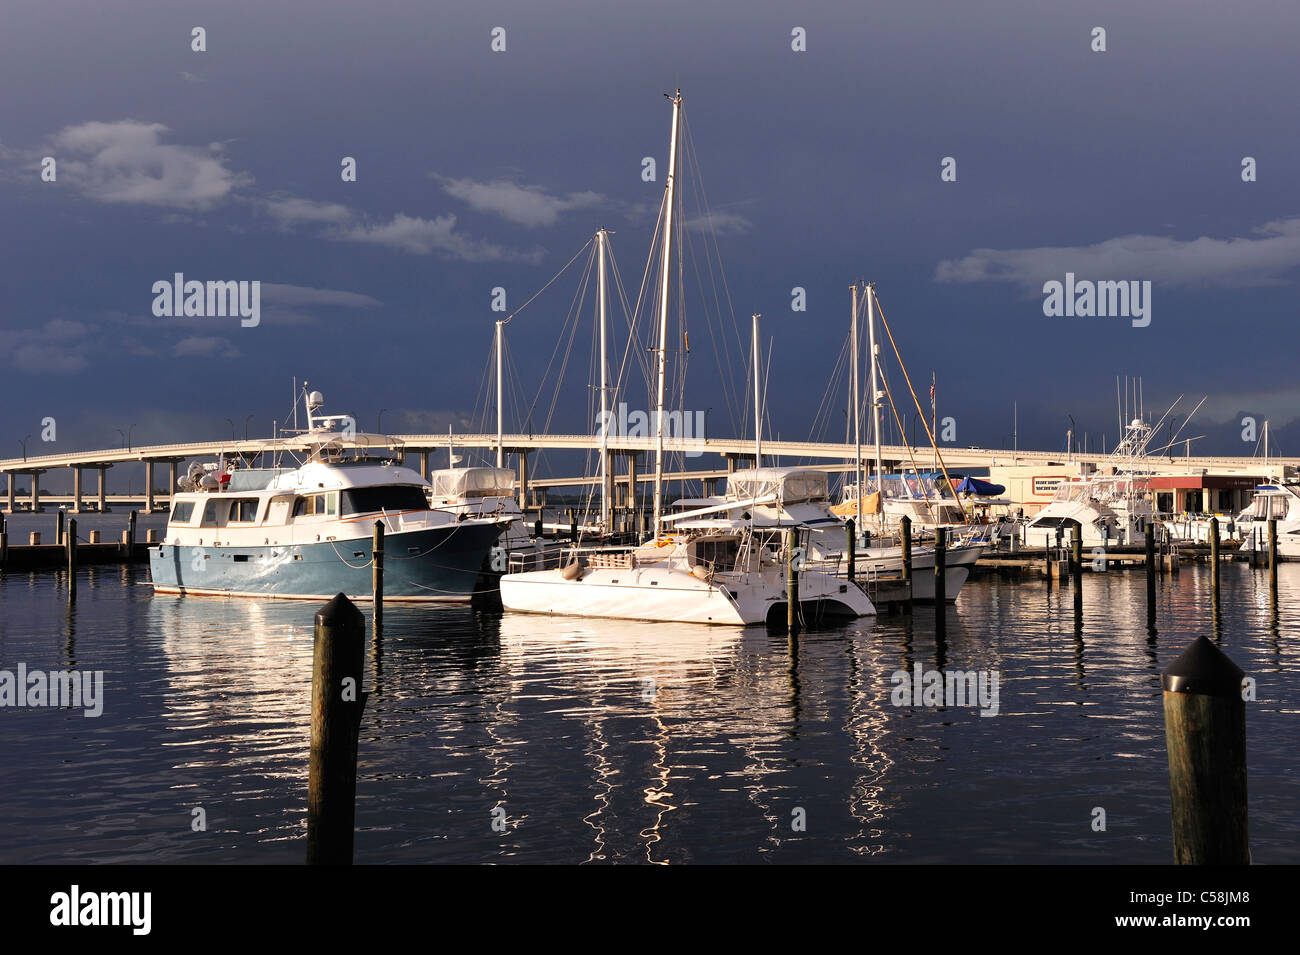 harbour, Boats, Marina, downtown Fort Myers, Florida, USA, United States, America, Stock Photo